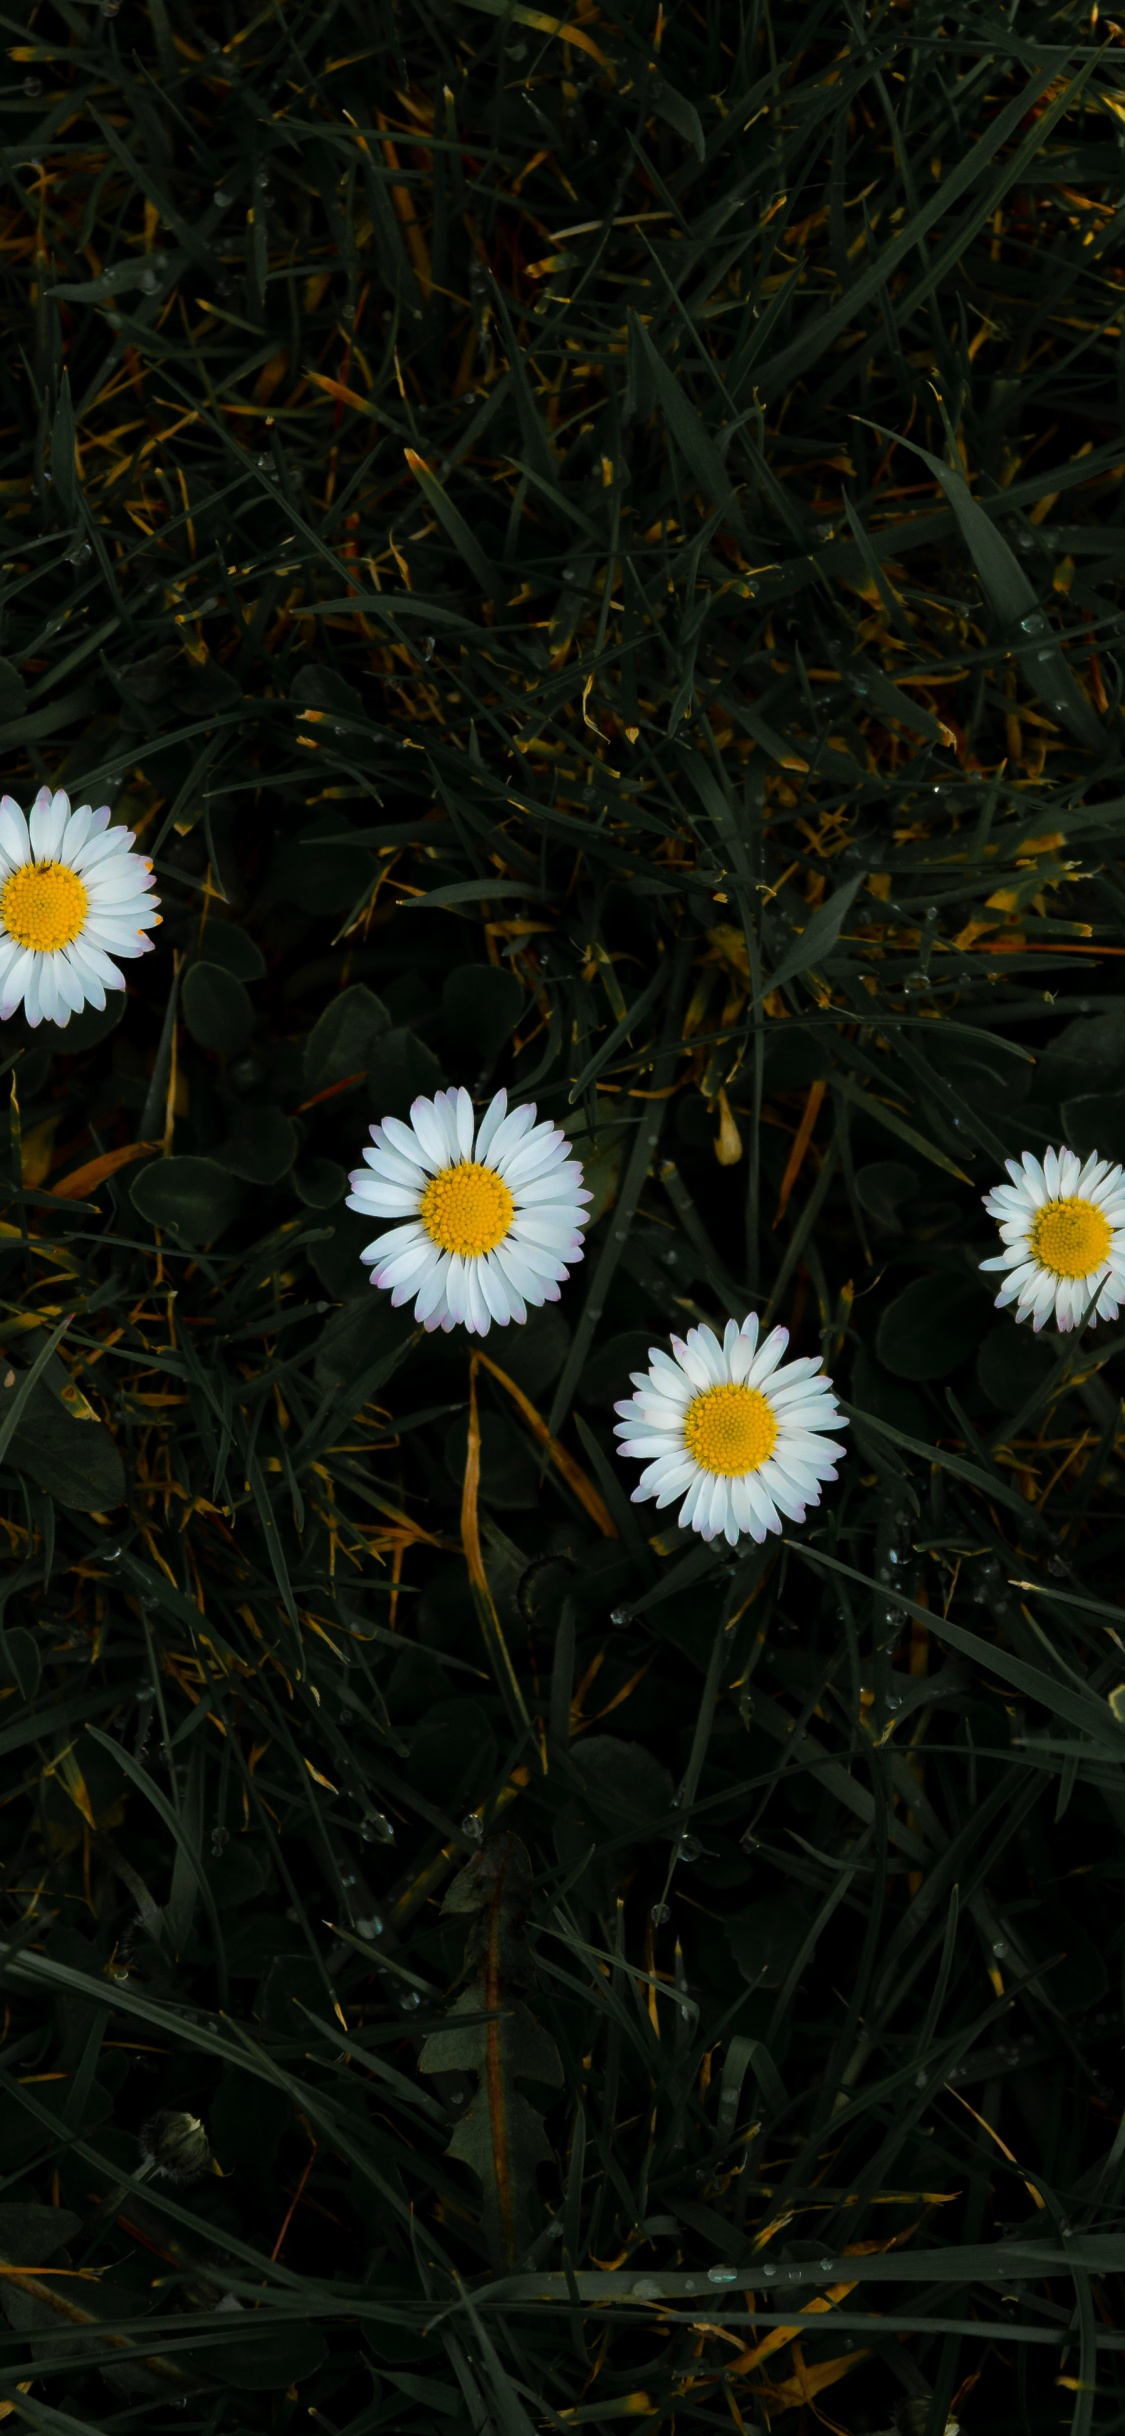 White Daisies in Bloom During Daytime. Wallpaper in 1125x2436 Resolution